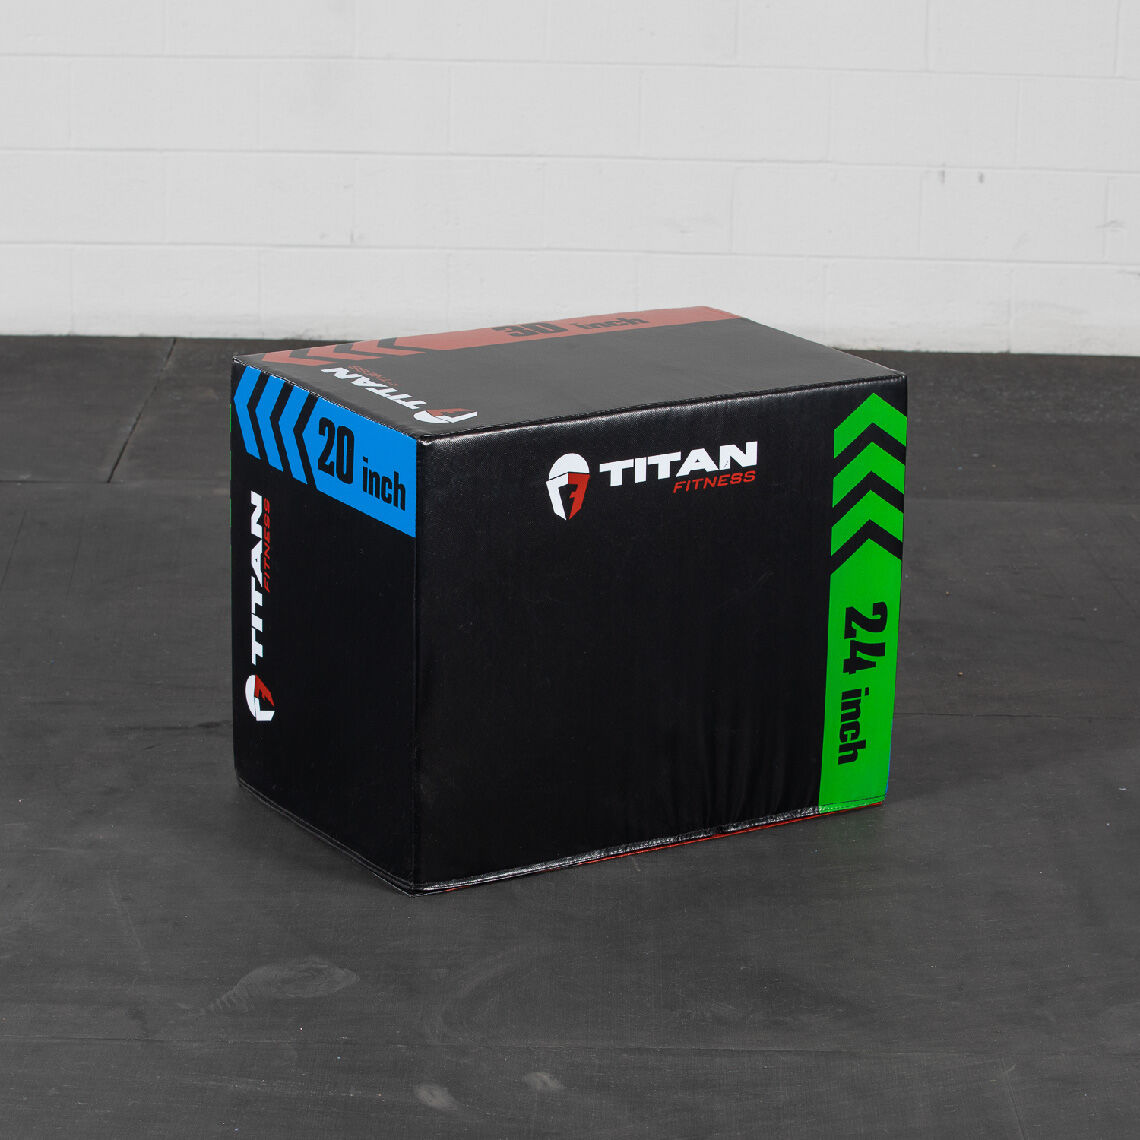 Titan Fitness 3 In 1 20" 24" 30" Heavy Foam Plyo Box Jumping Exercise-Crossfit 